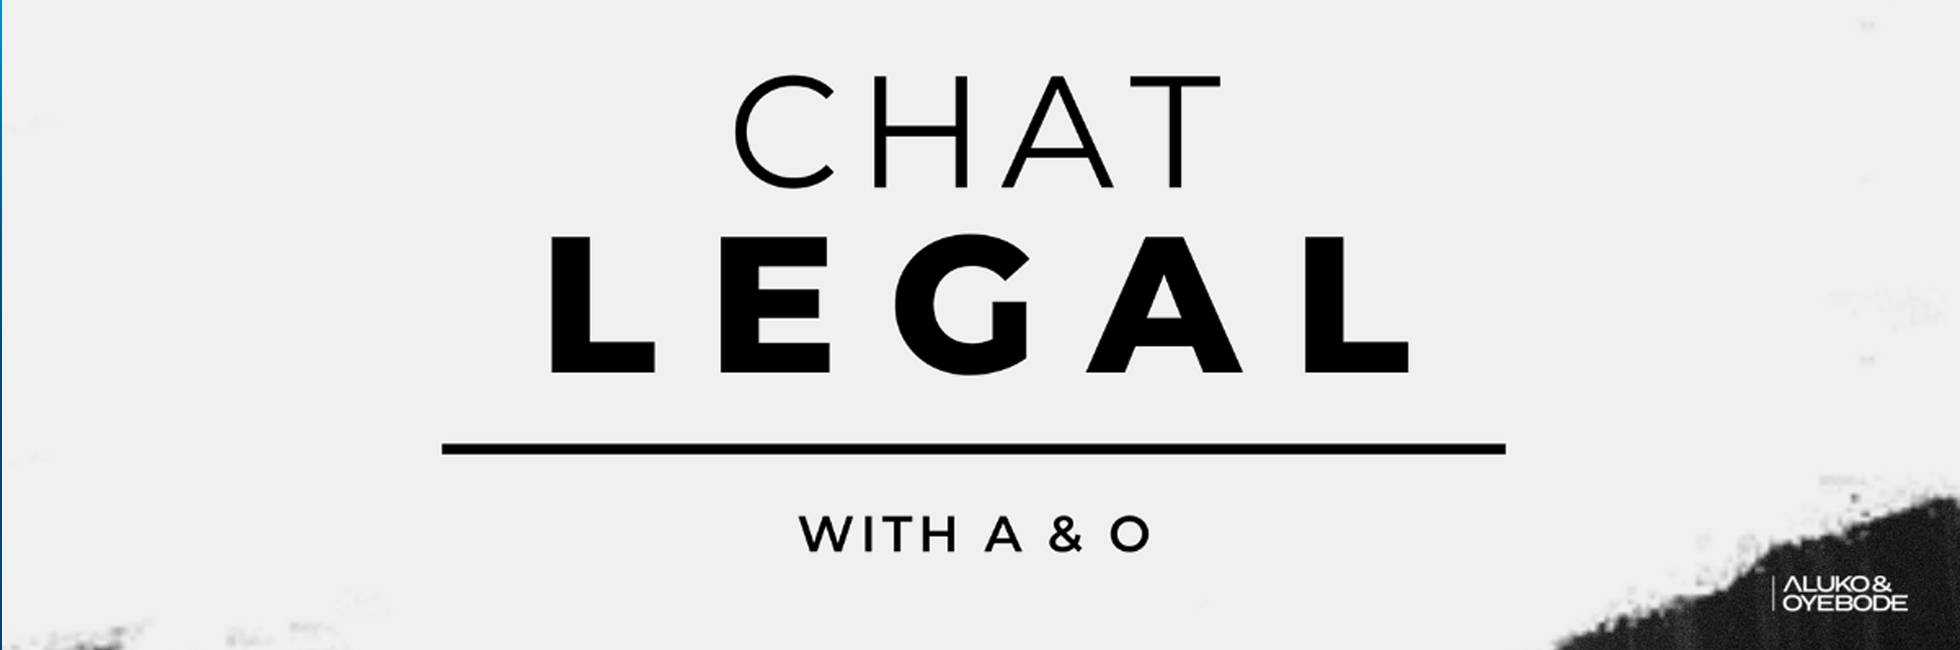 Demystifying FinTech | Chat Legal with A & O Podcast